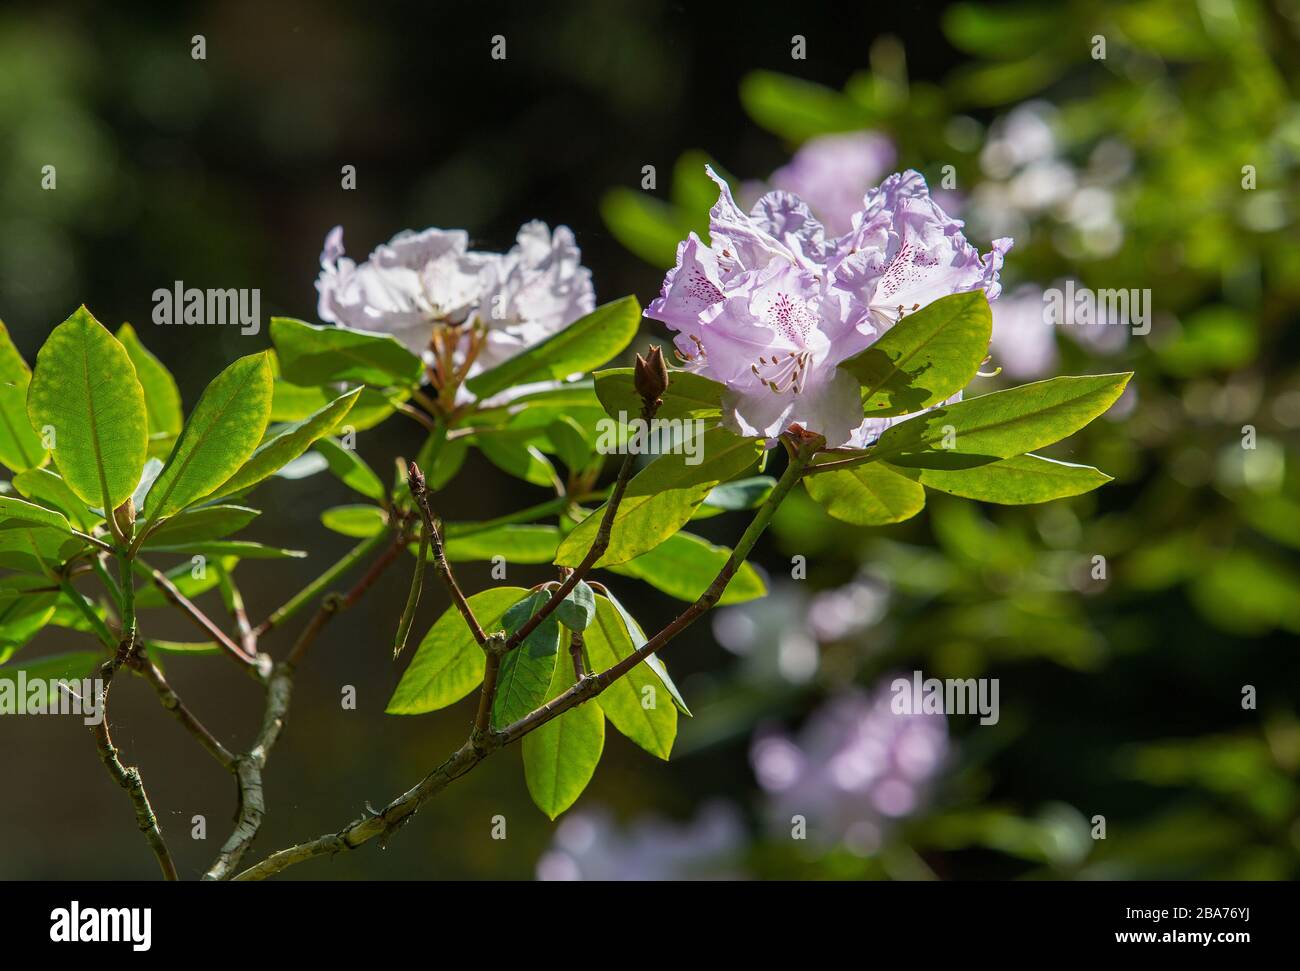 Idyllic blooming white rhododendrons (with a slight shade of purple) in the garden of Albert Kahn Stock Photo